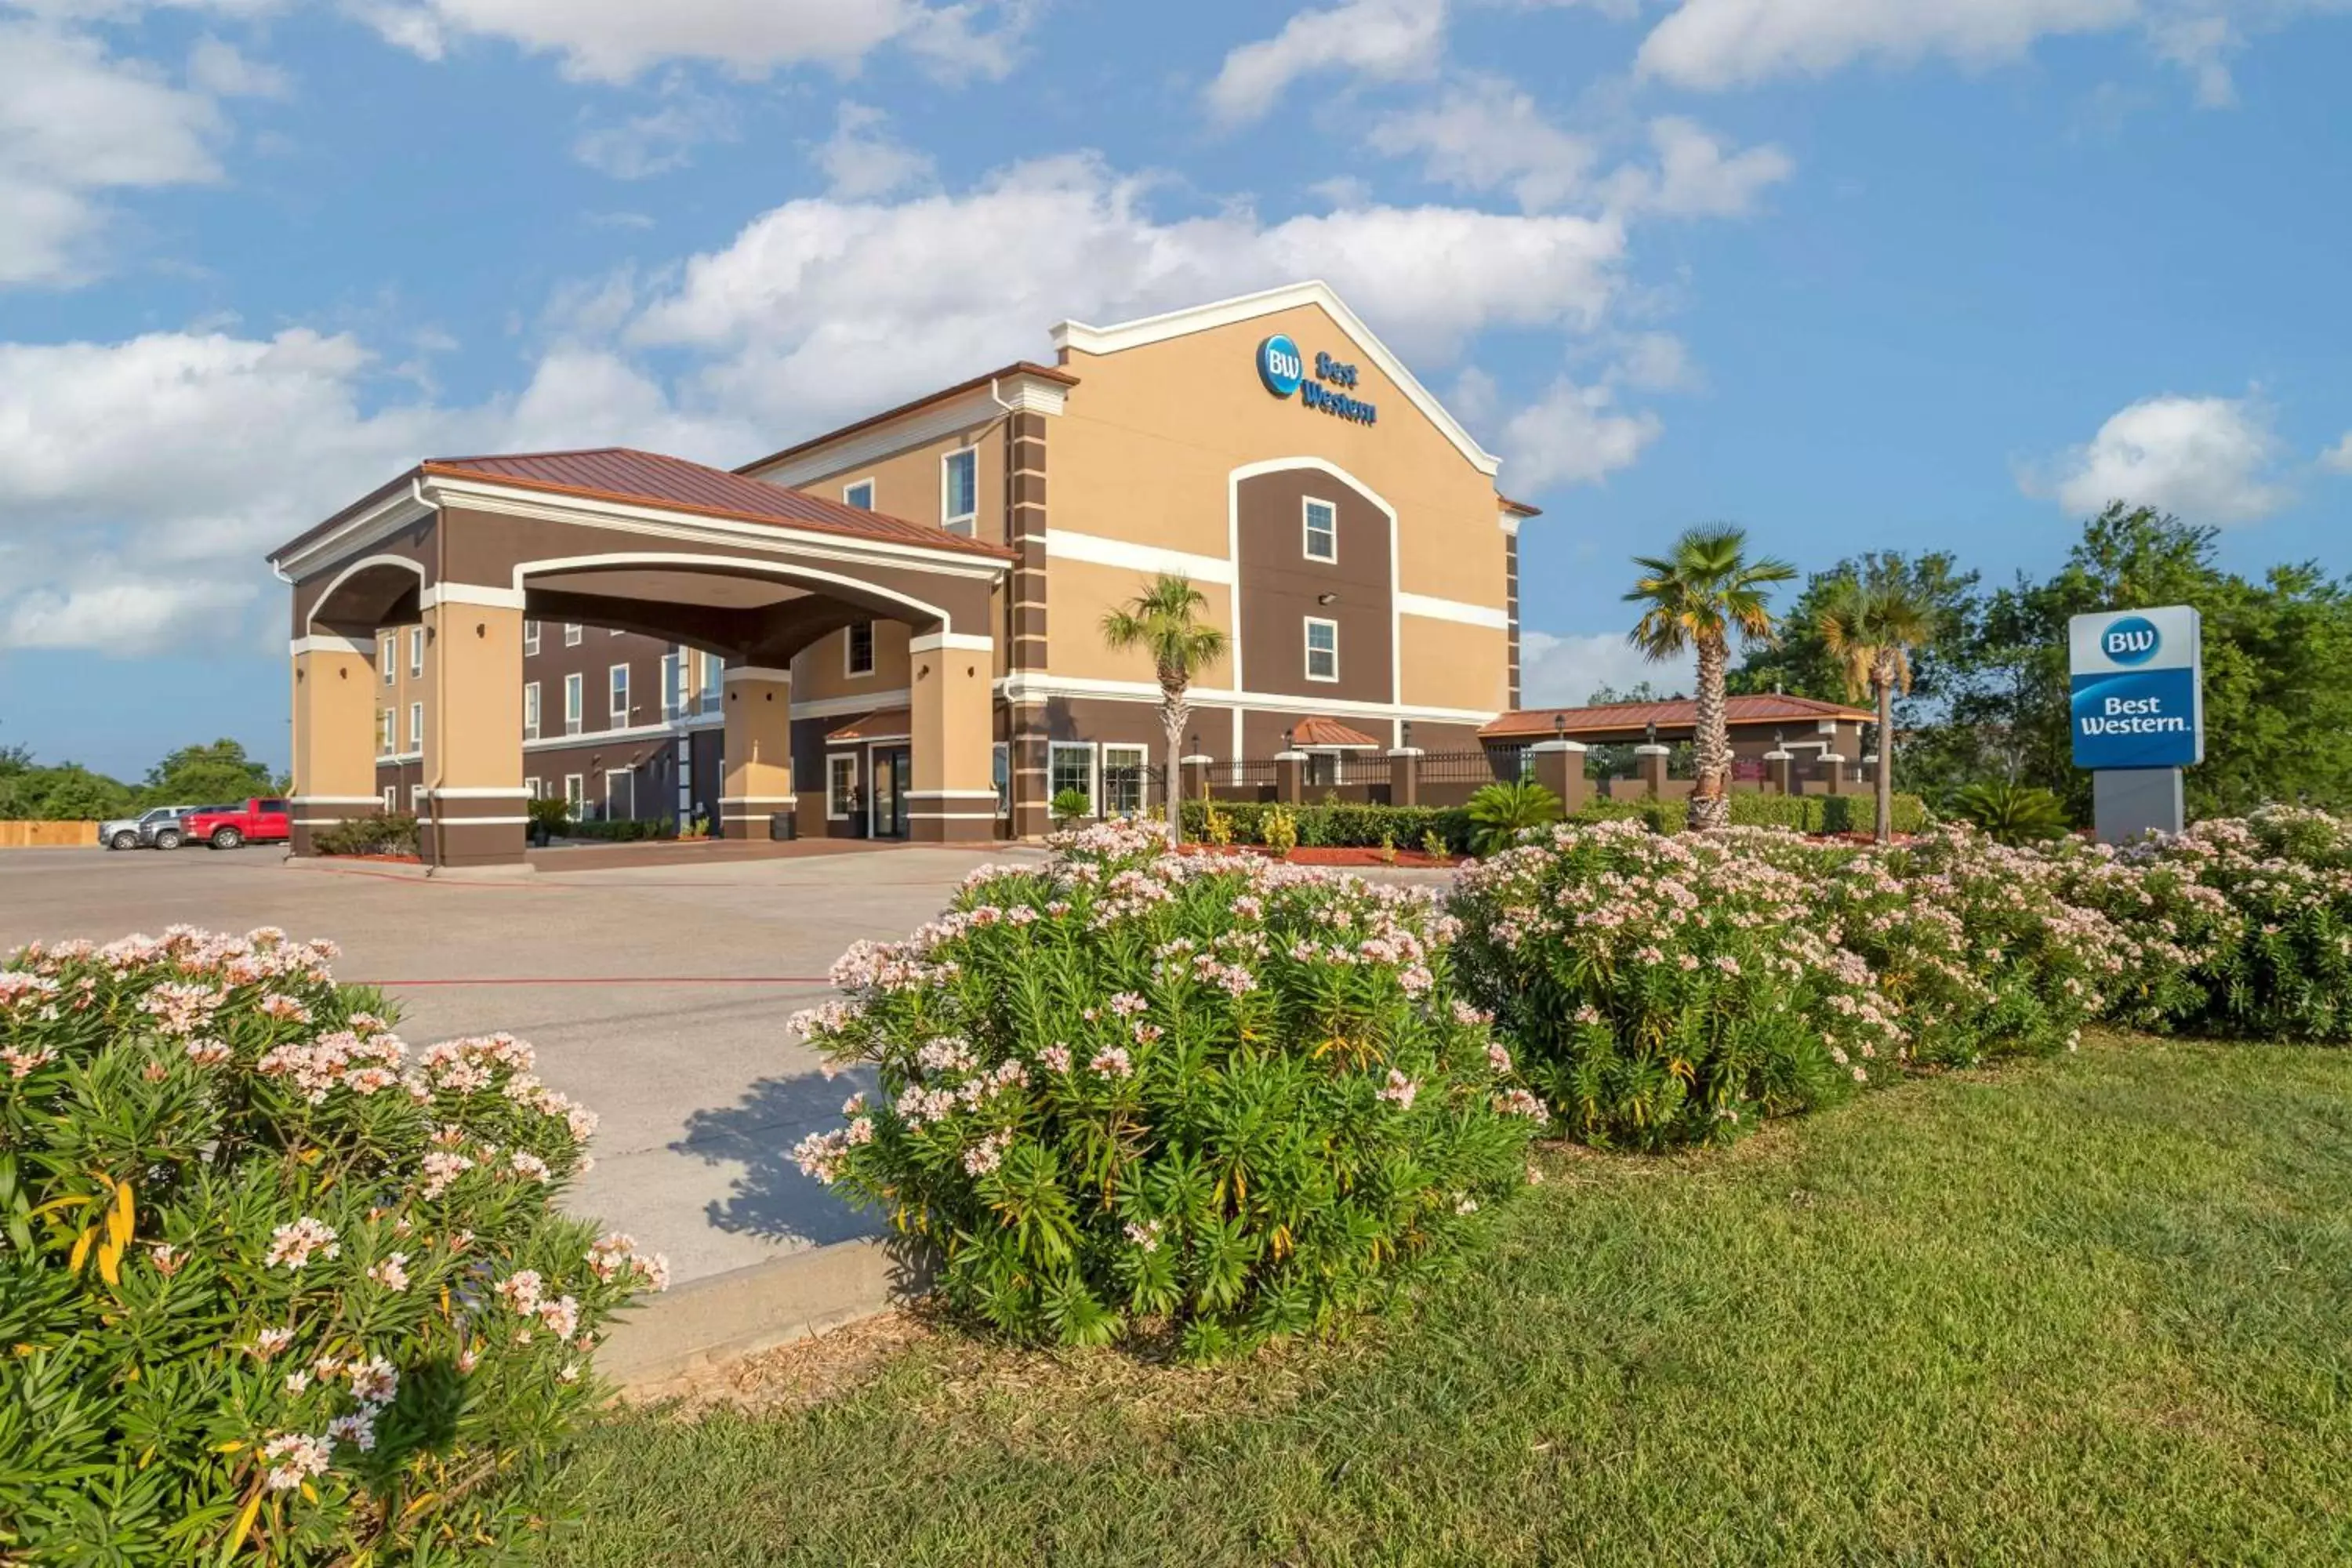 Property Building in Best Western Texas City